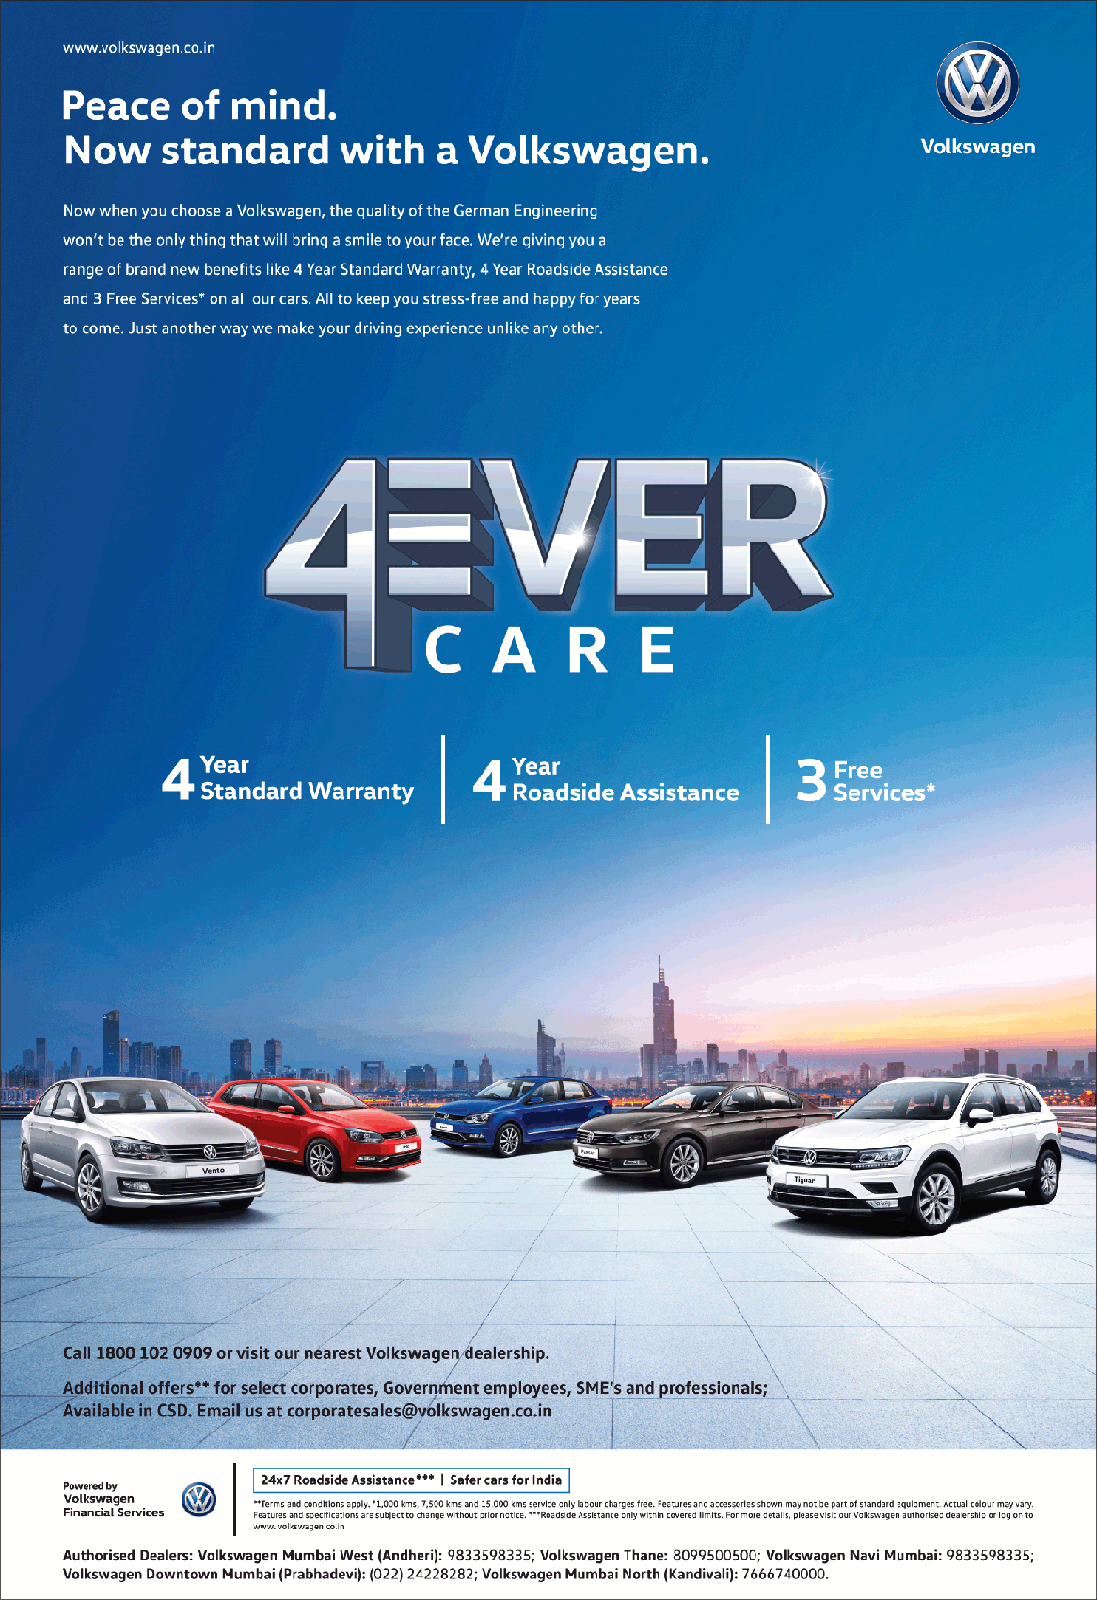 volkswagen-4ever-care-4-year-standard-warranty-ad-times-of-india-mumbai-08-01-2019.png